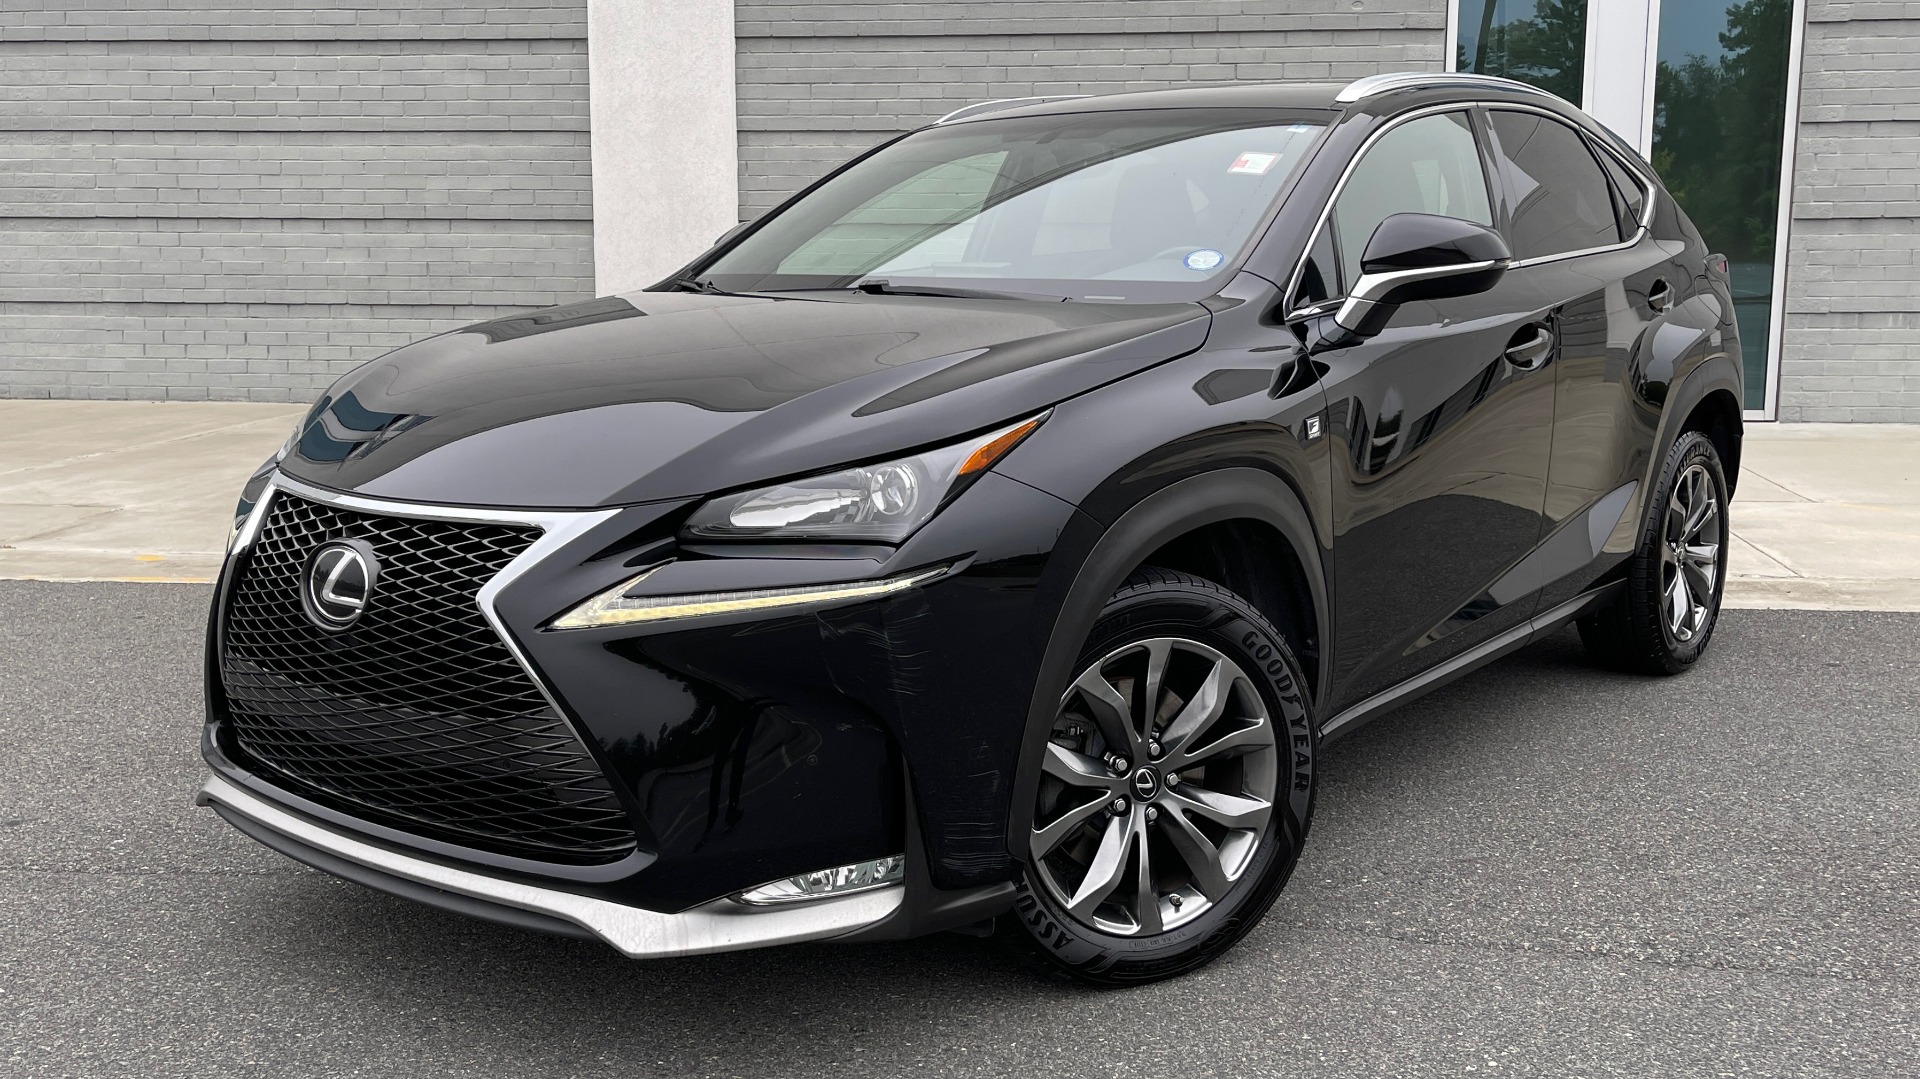 Used 2017 Lexus NX 200T PREMIUM F-SPORT / 2.0L TURBO / BSM / PARK ASST / REARVIEW for sale Sold at Formula Imports in Charlotte NC 28227 1